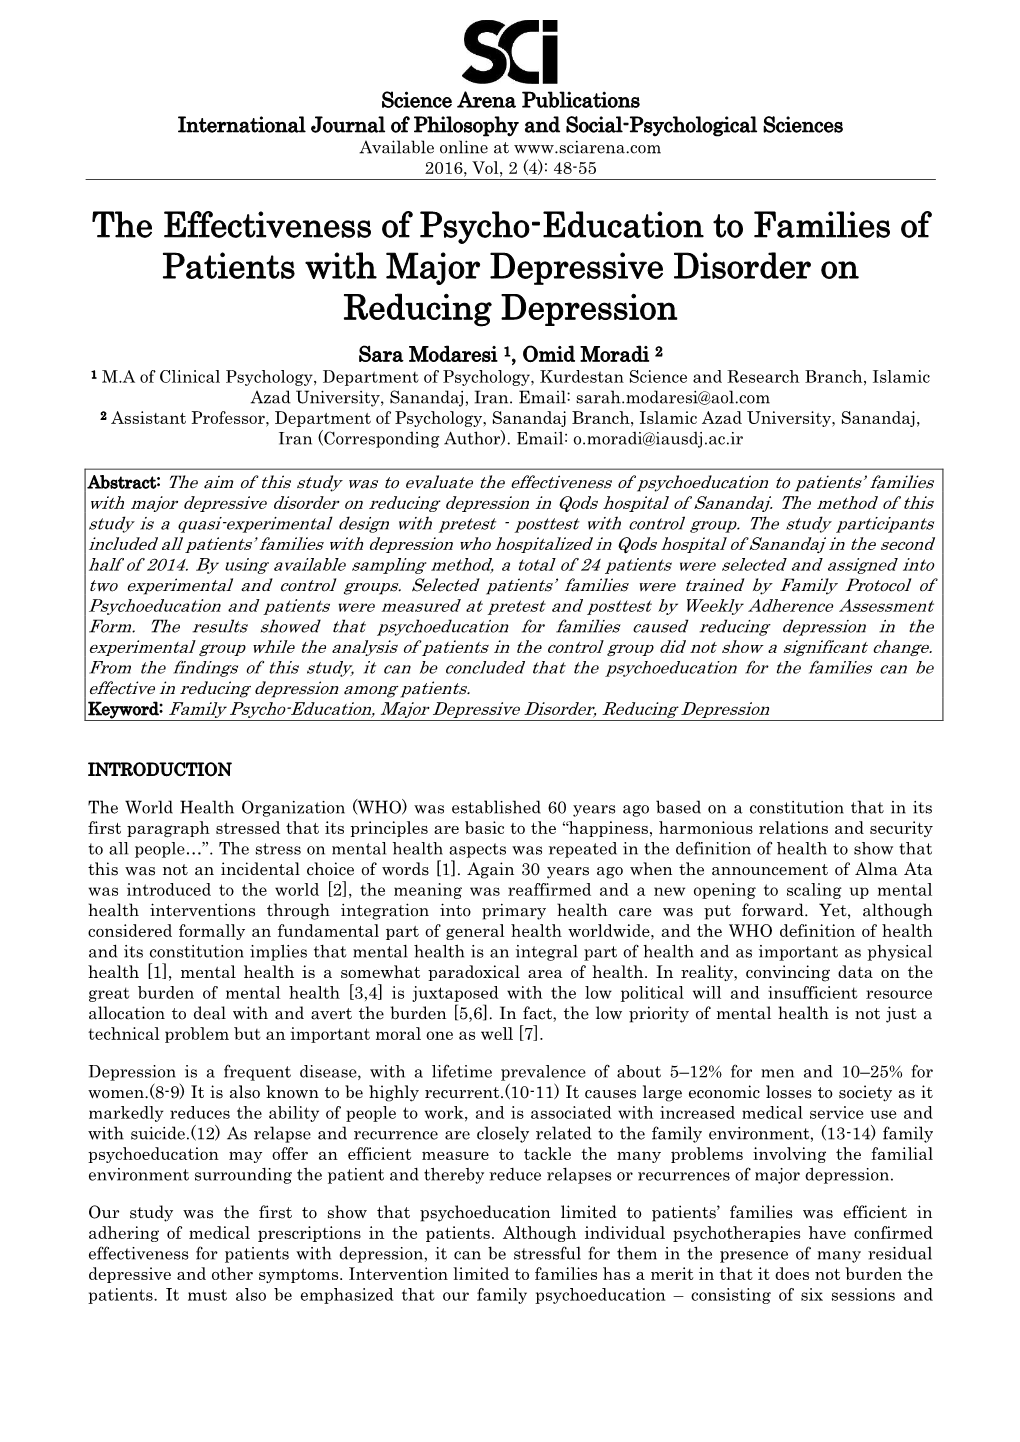 The Effectiveness of Psycho-Education to Families of Patients with Major Depressive Disorder on Reducing Depression